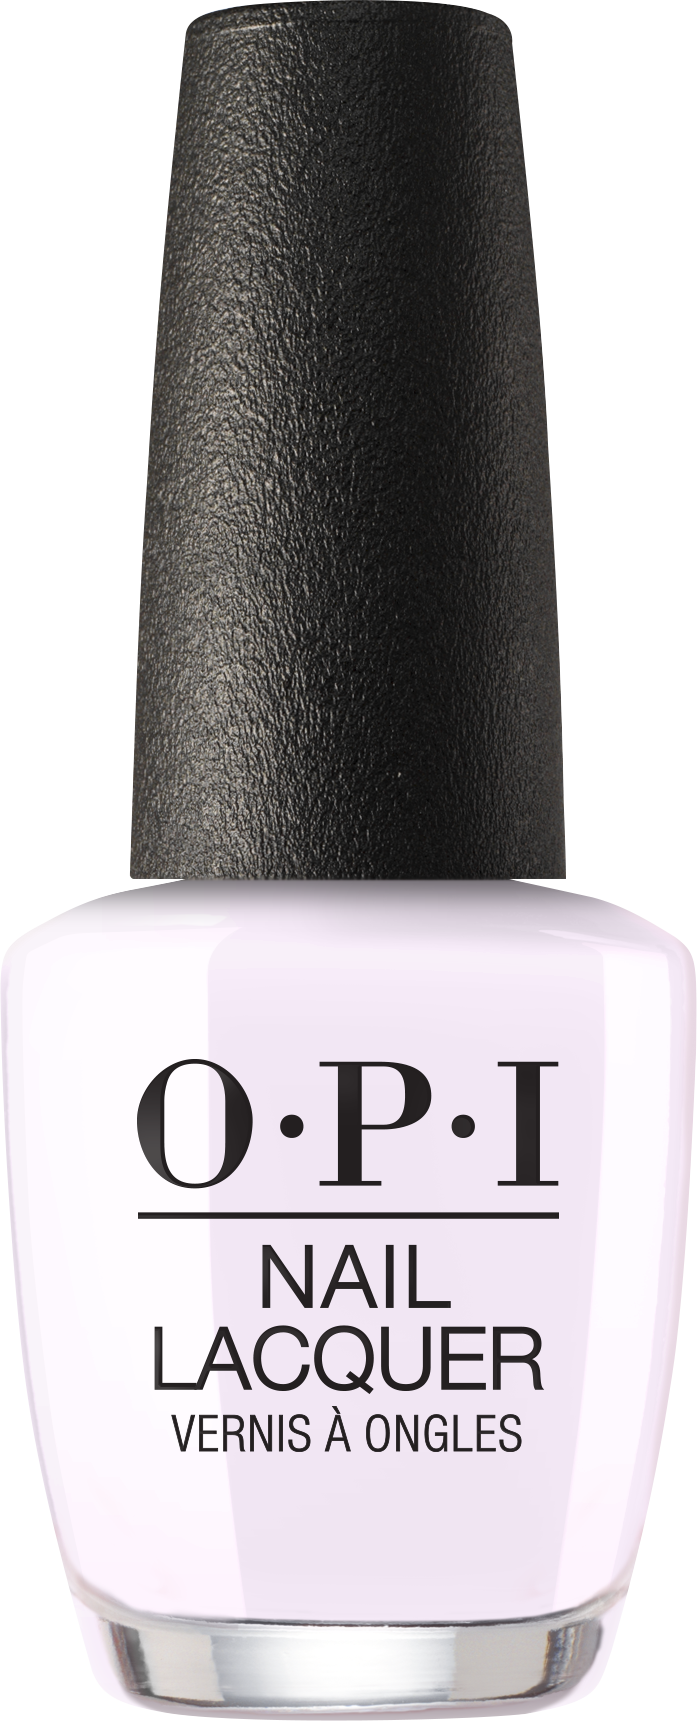 OPI Hue is the Artist? nail lacquer